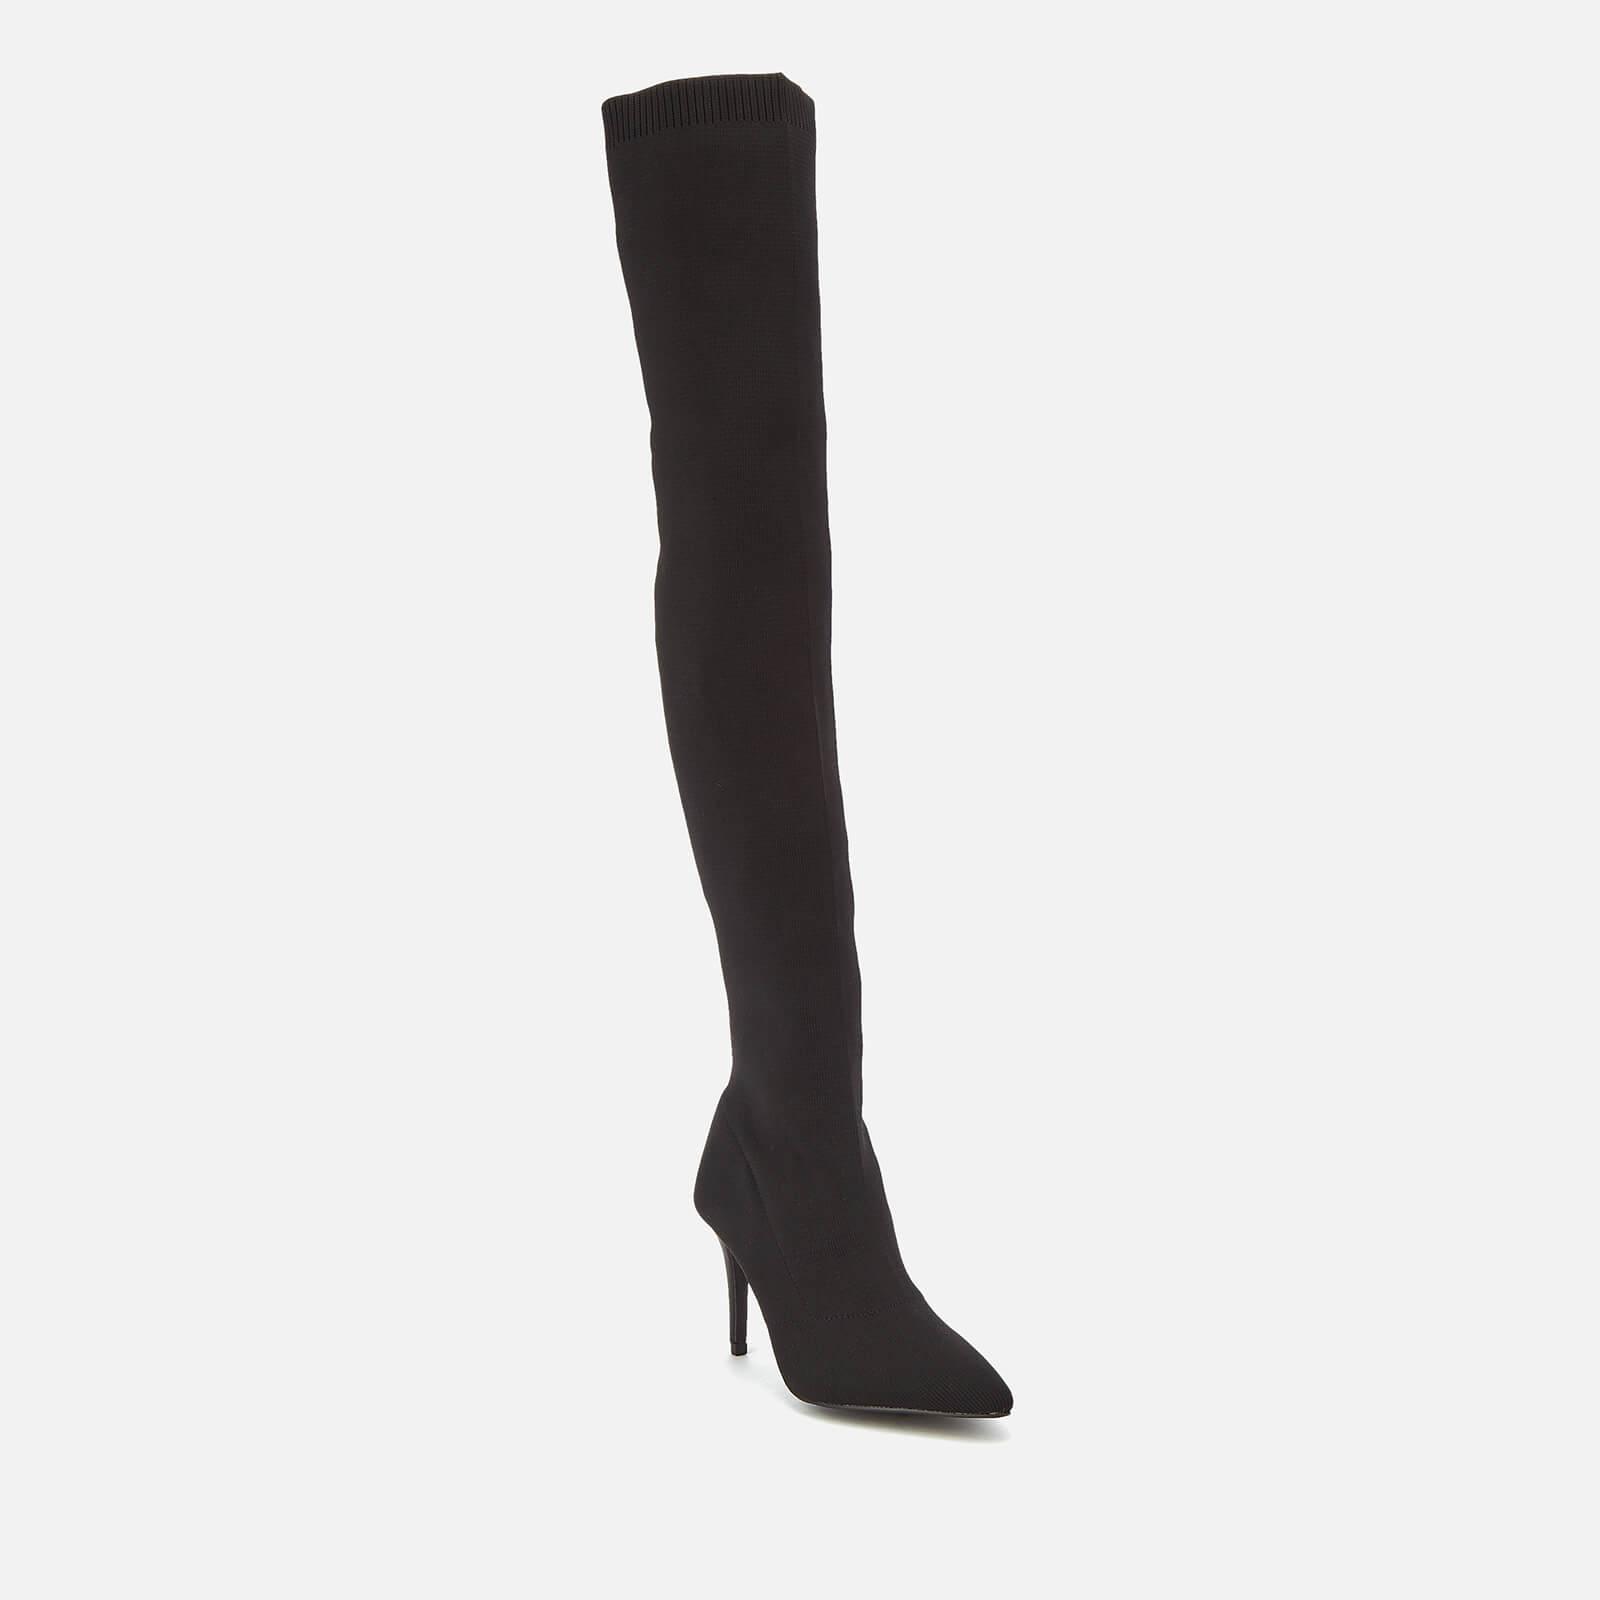 Carvela Kurt Geiger Synthetic Gasp Stretch Thigh High Heeled Boots in Black  - Lyst